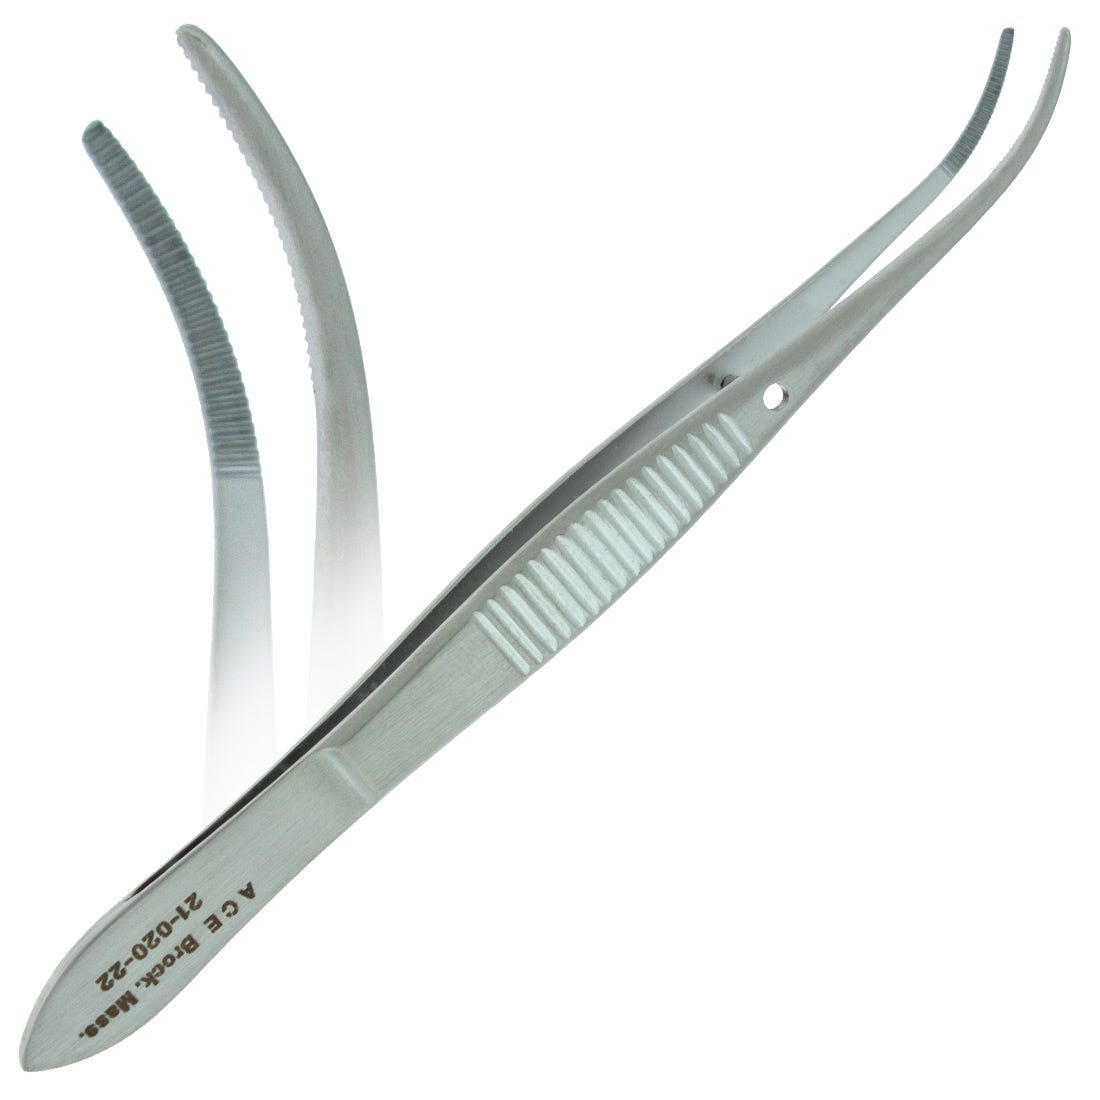 ACE Iris Tissue Forceps, half curved, very delicate, serrated tips